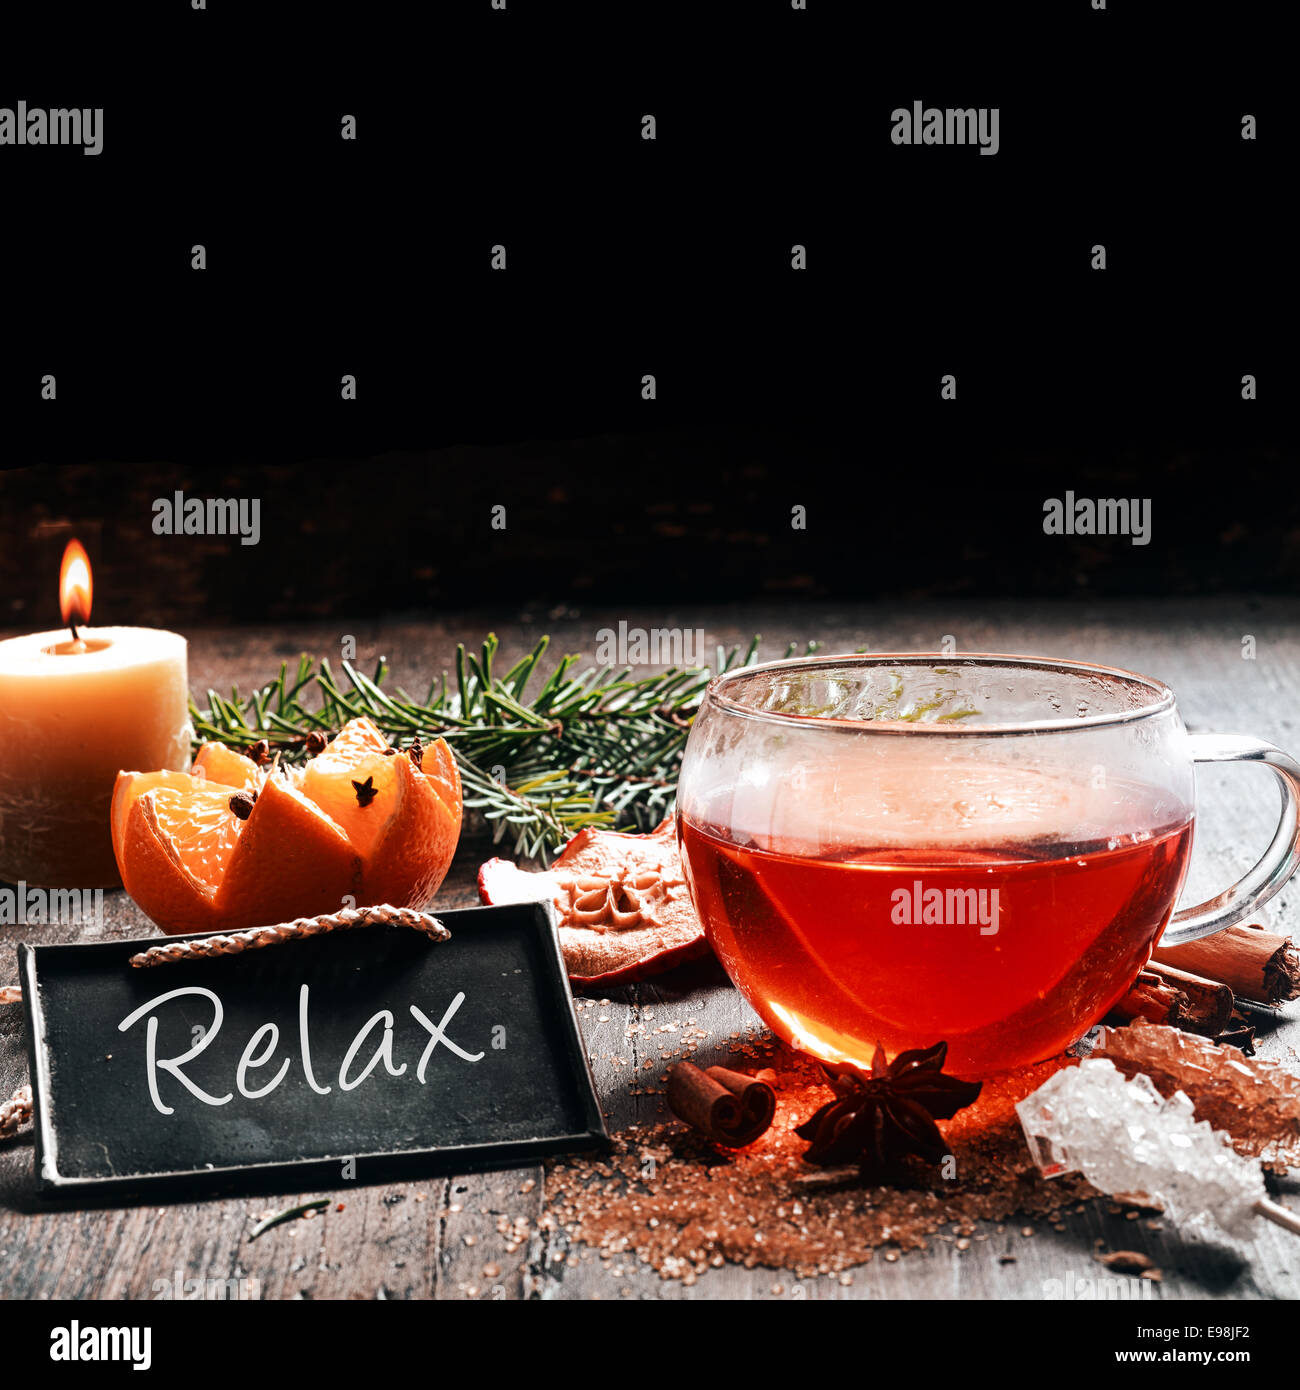 Christmas Photo Design Emphasizing Relax on Vintage Wooden Table. Stock Photo